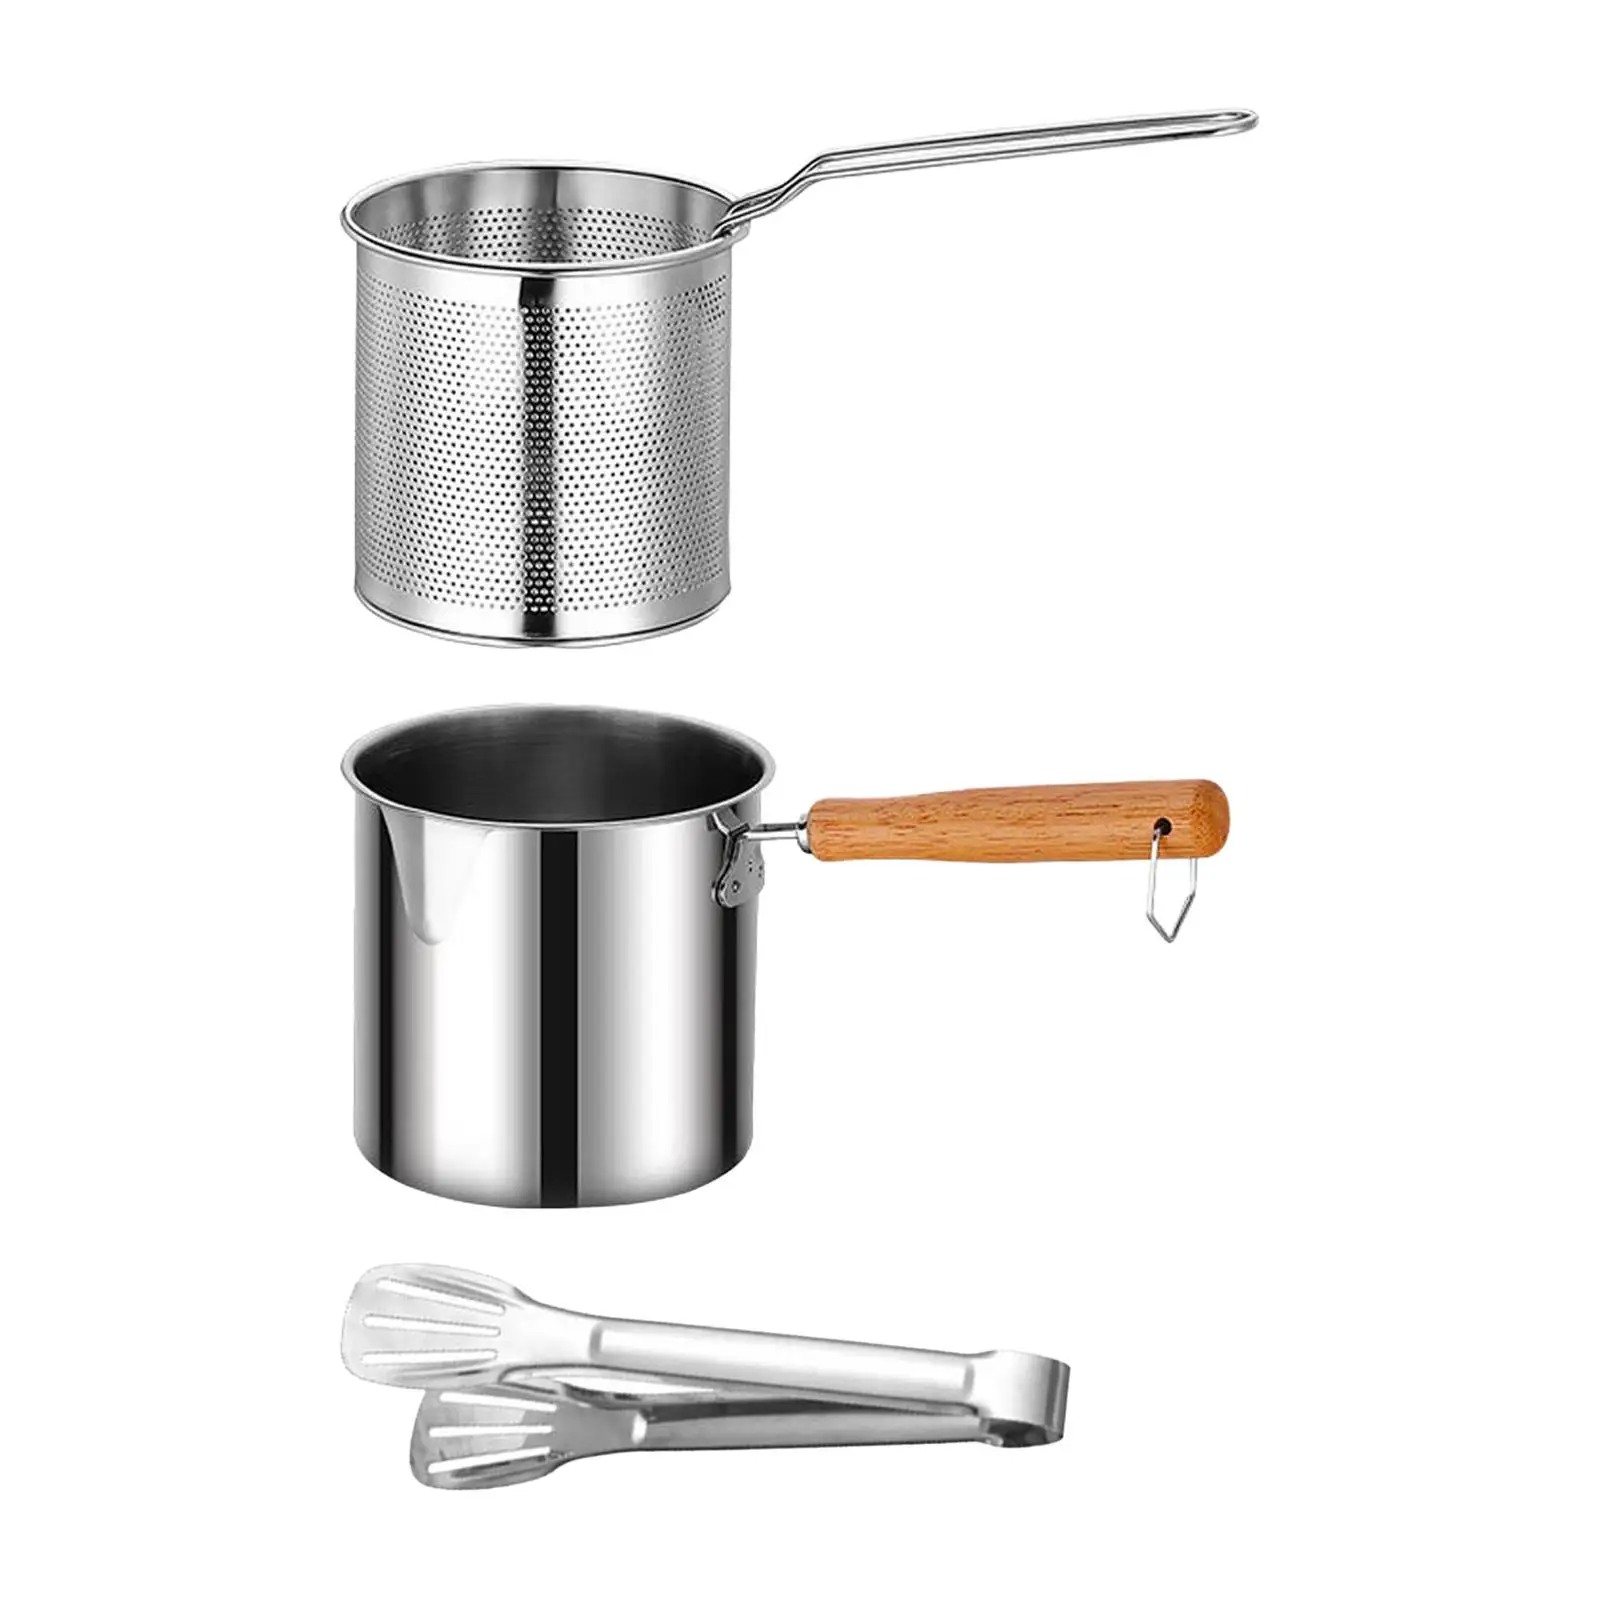 Deep Fry Pan with Handle Cooking Tools Kitchen with Strainer Basket Kitchen Frying Pan for Home Tempura Chicken Dried Fries